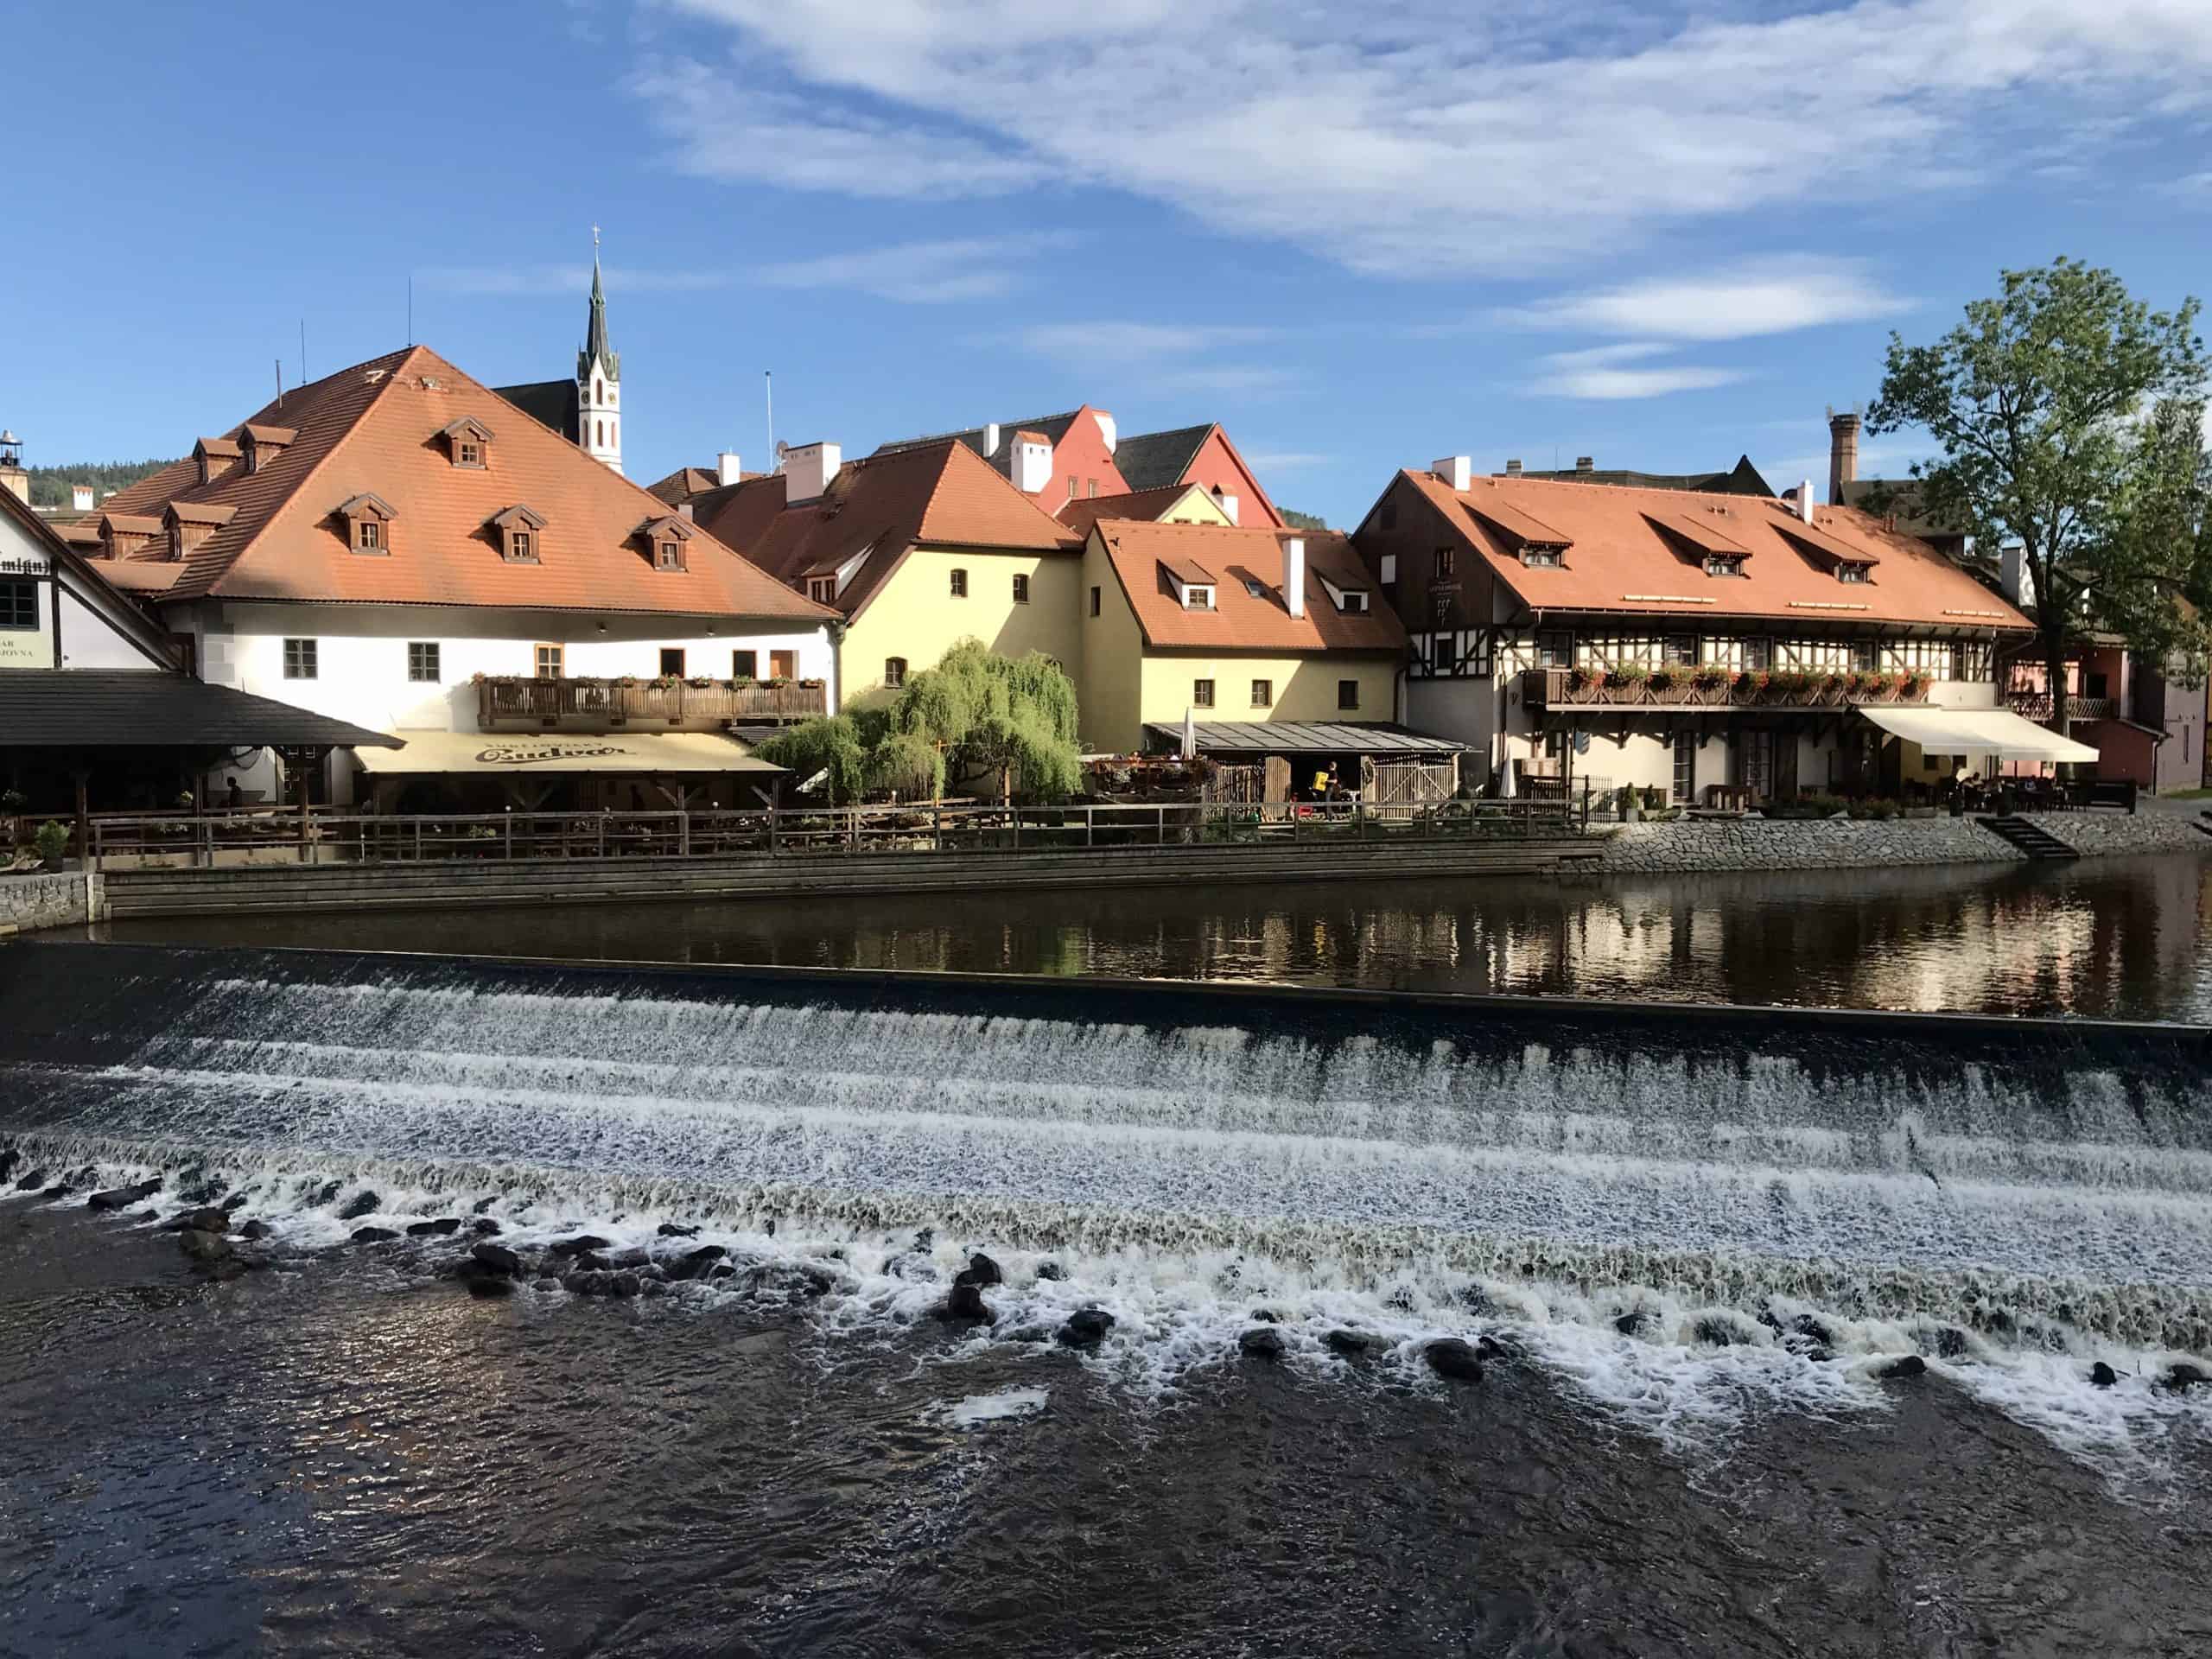 There are some weirs to navigate if you go rafting in Český Krumlov